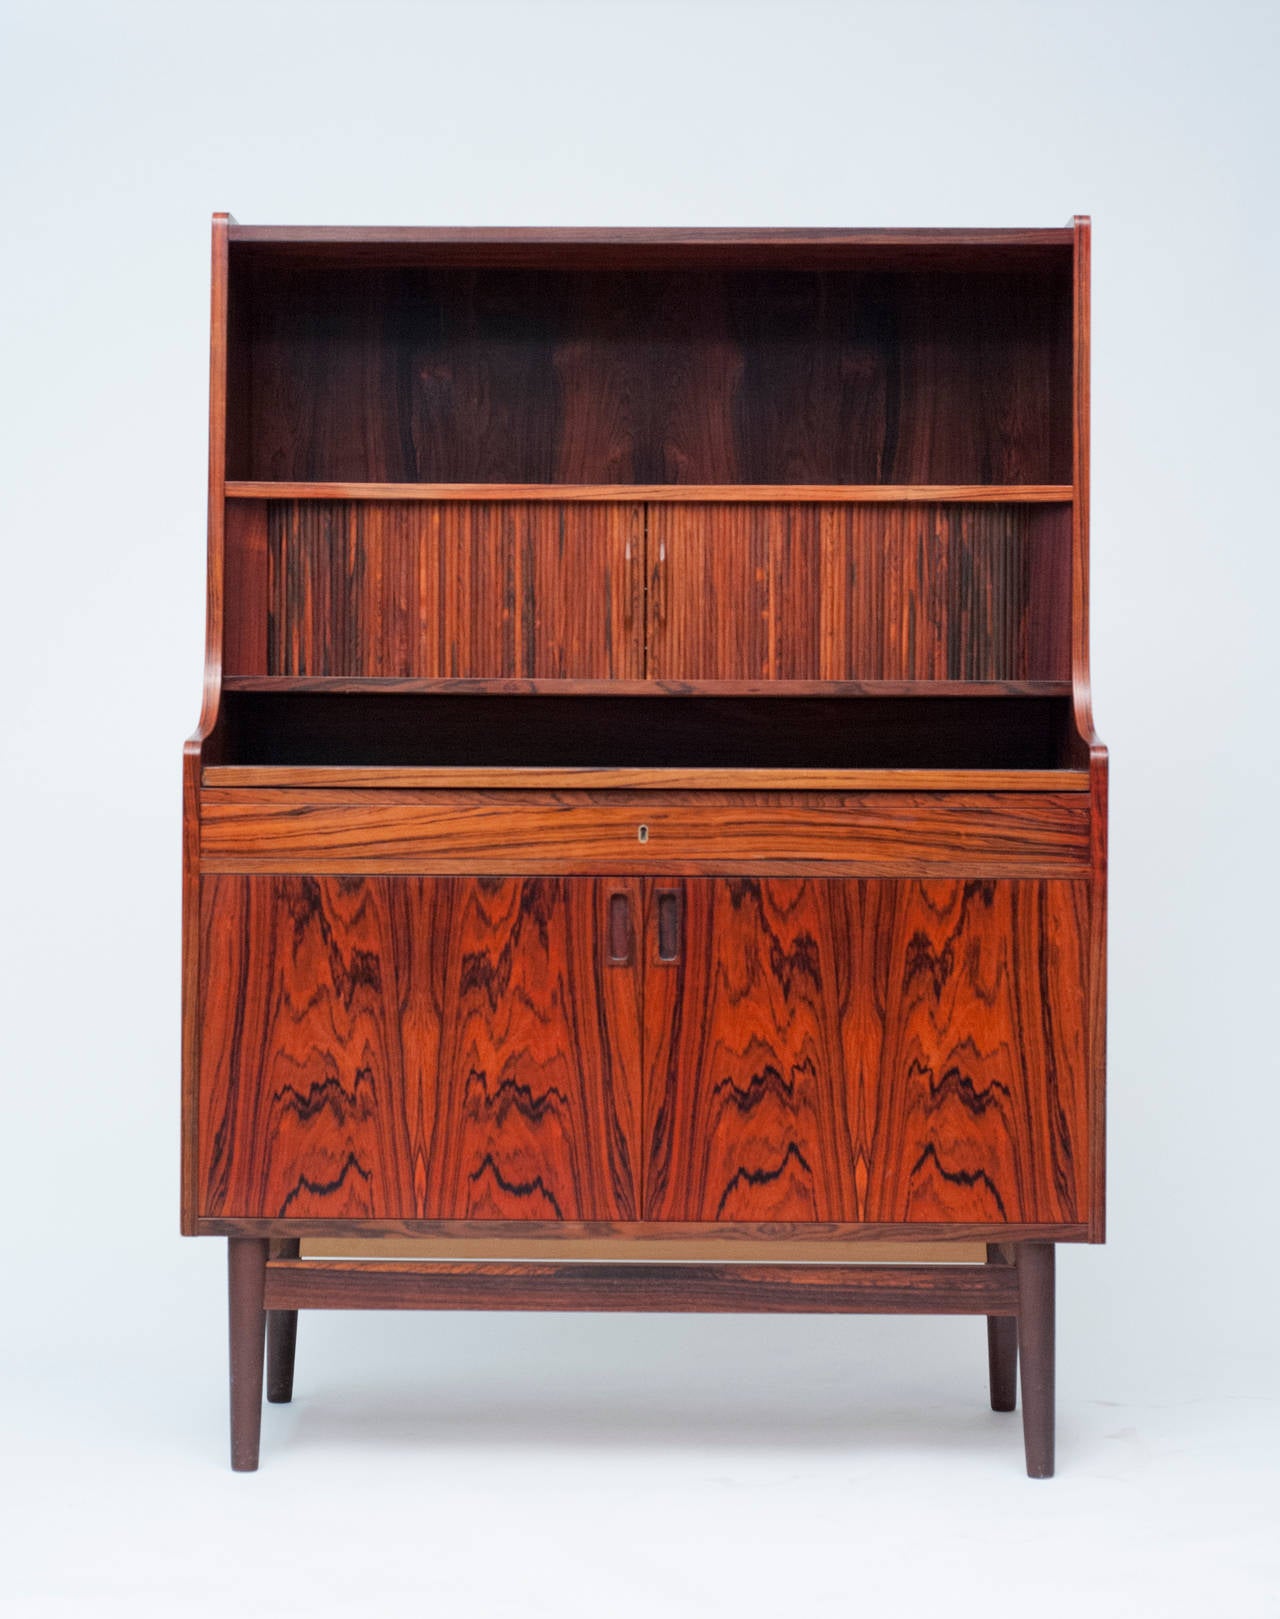 Attractive and functional rosewood Secretary by Bornholm Mobler of Denmark.  Tambour doors retract to reveal three drawers, one of which contains a mirror.  Writing desk can be pulled out or retracted when not in use. Secretary is complete with